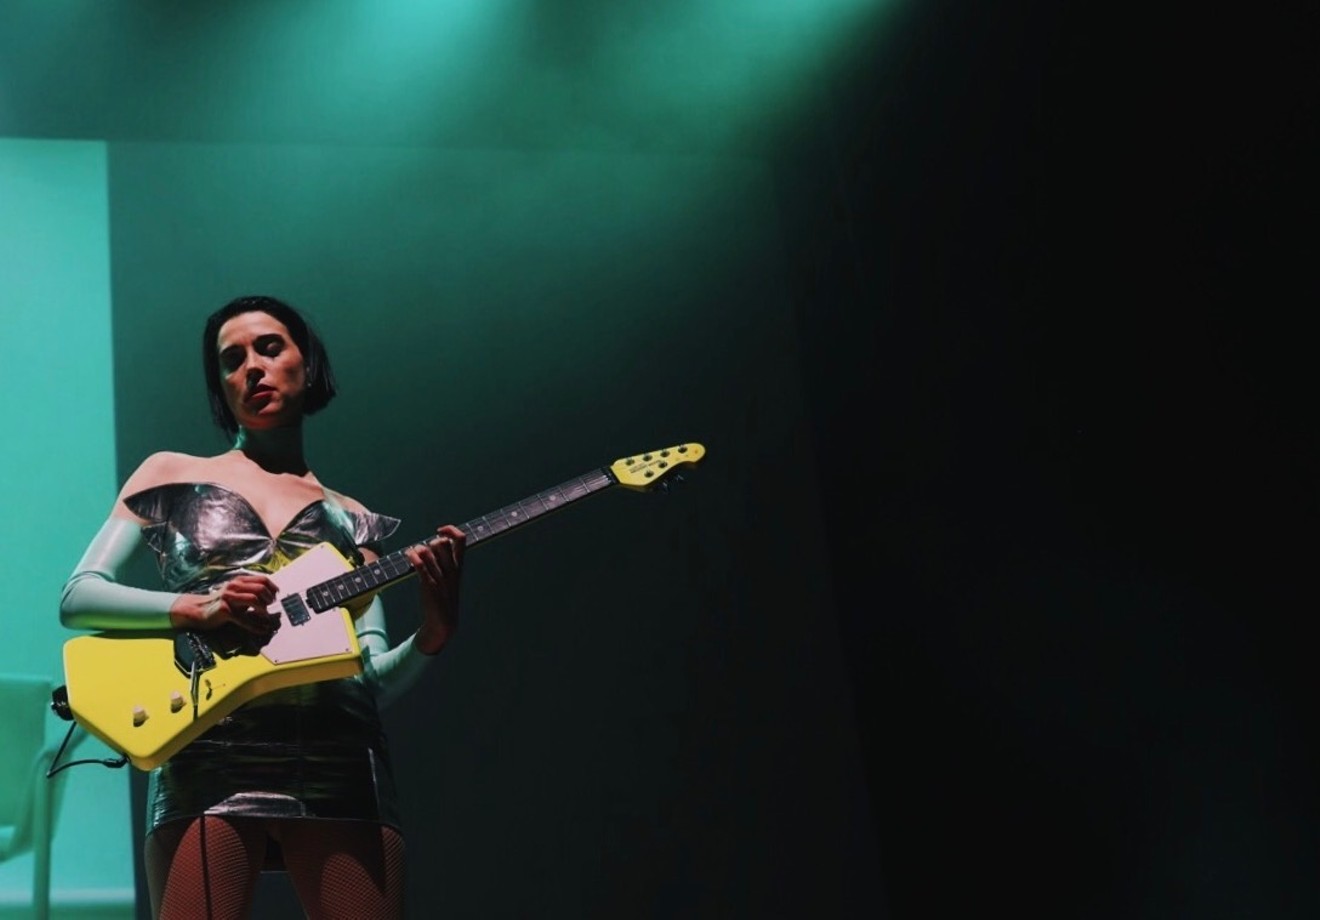 St.Vincent brought Masseduction to life at House of Blues.